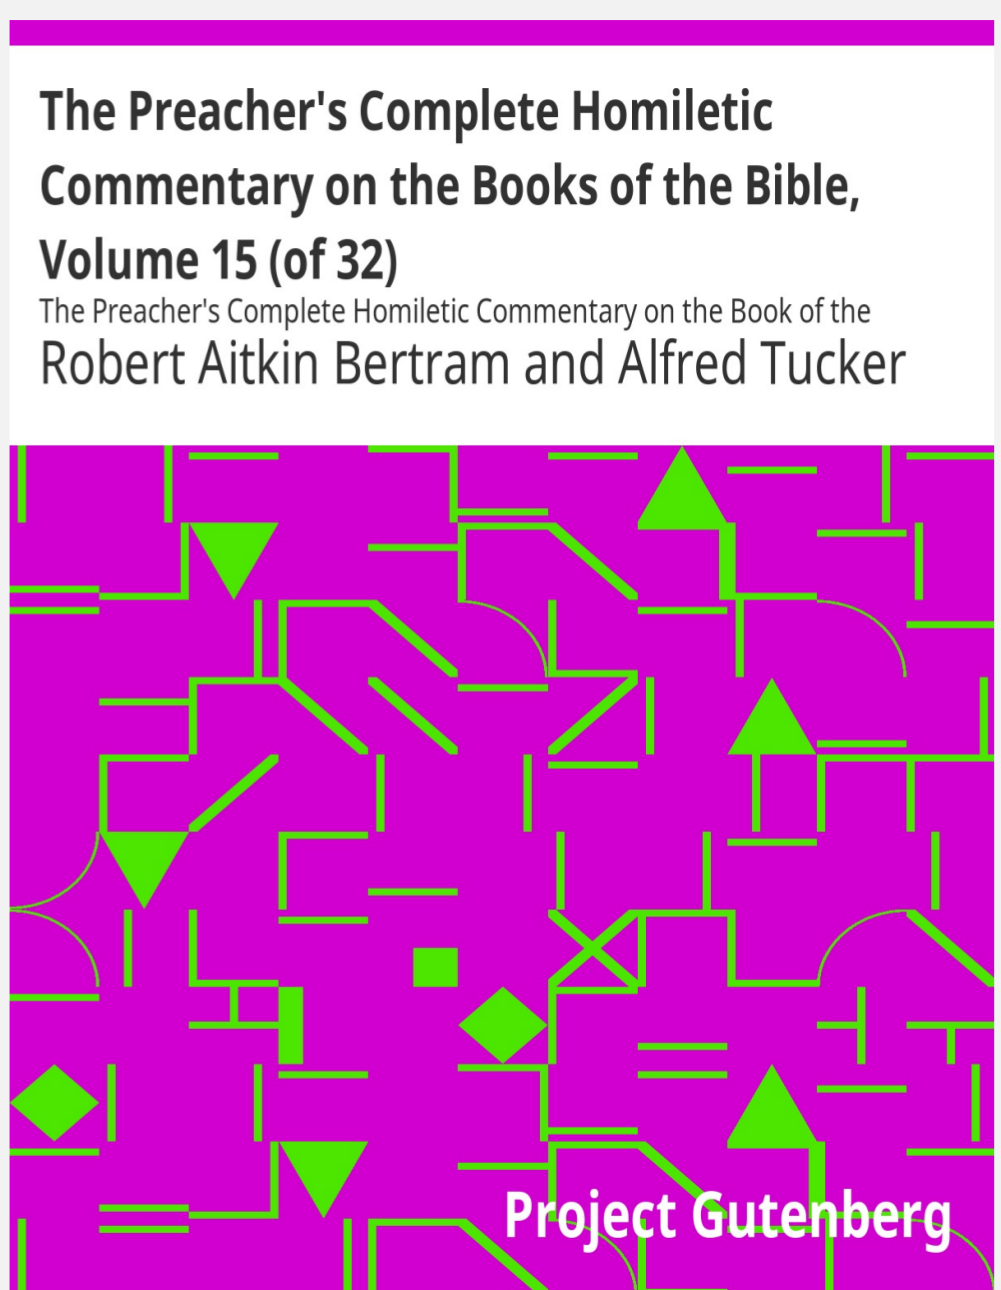 THE PREACHER'S COMPLETE HOMILETIC COMMENTARY ON THE BOOKS OF THE BIBLE BY ROBERT AITKIN AND ALFRED TUCKER